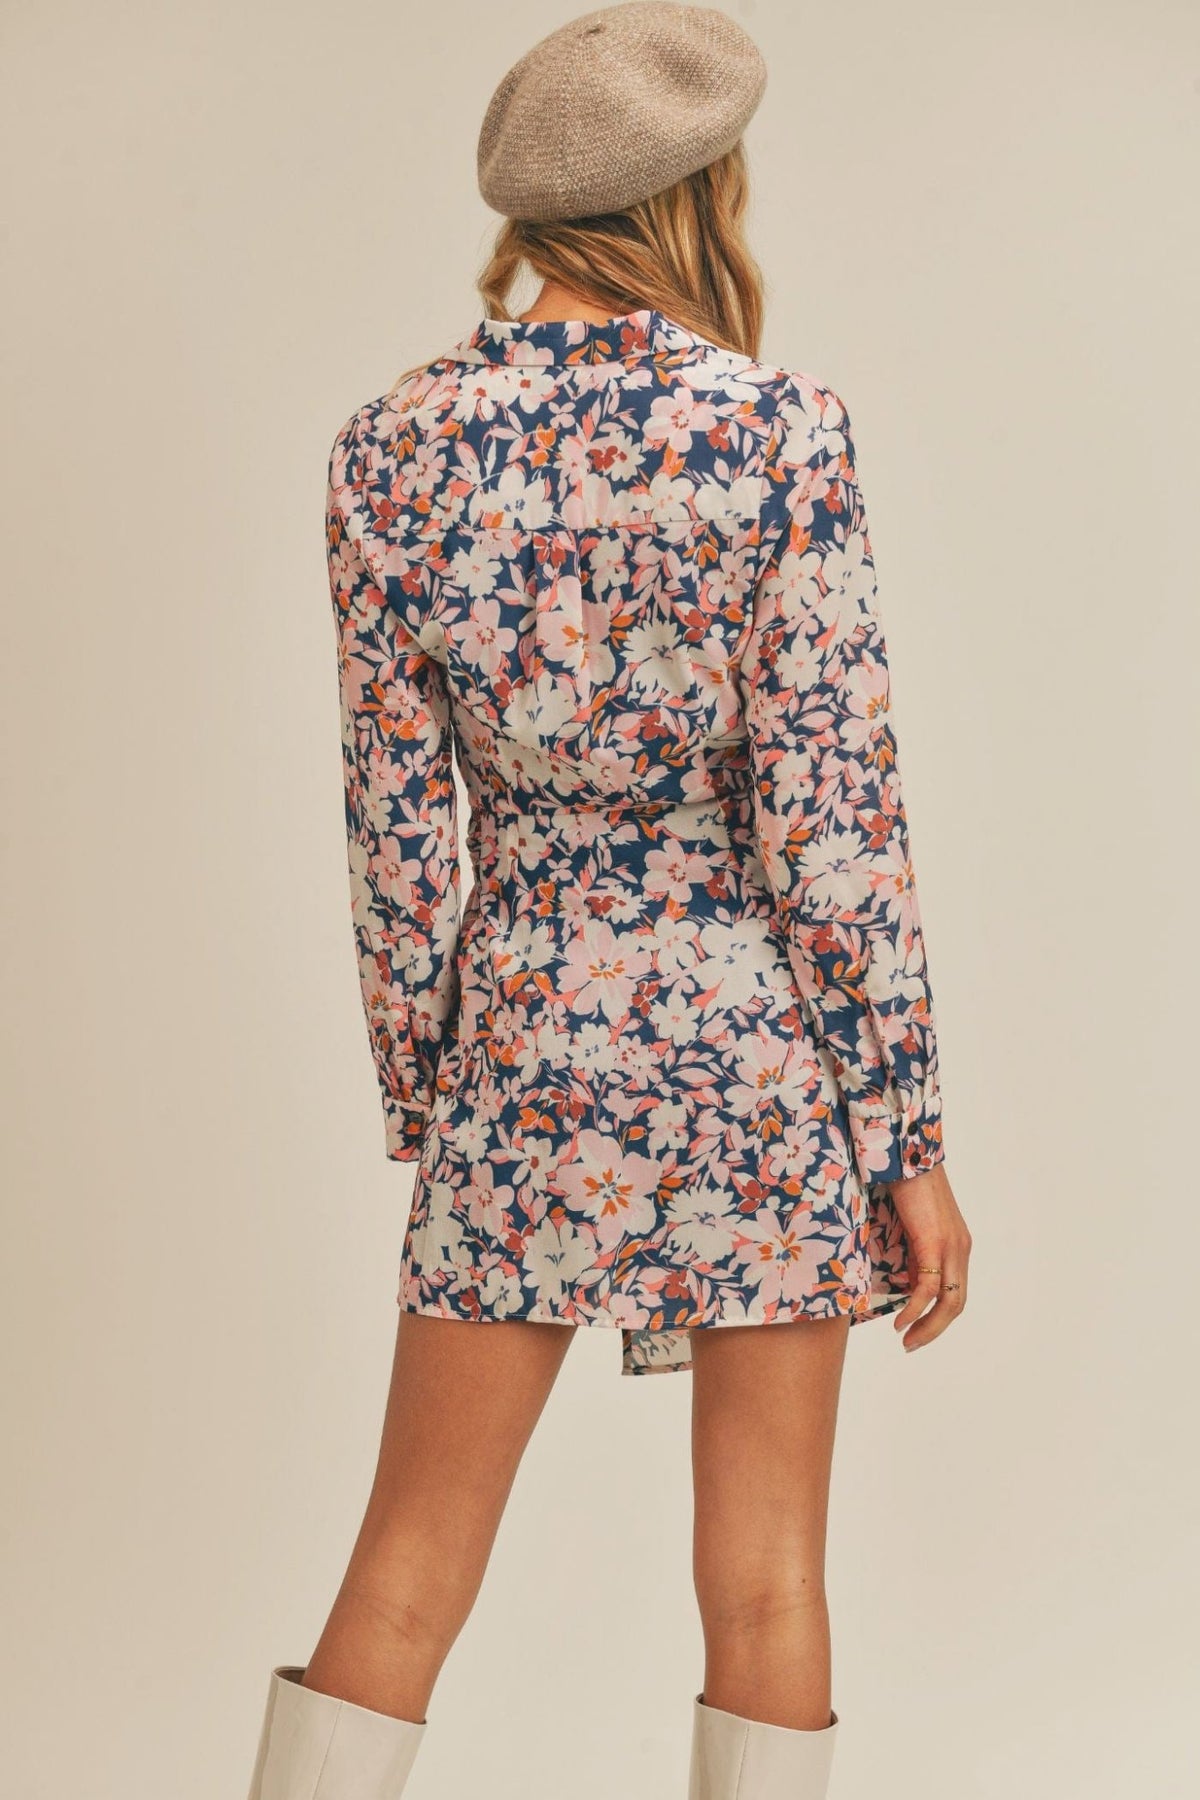 Sage The Label Retro Petals Floral Long Sleeve Wrap Mini Dress - Dresses - Blooming Daily